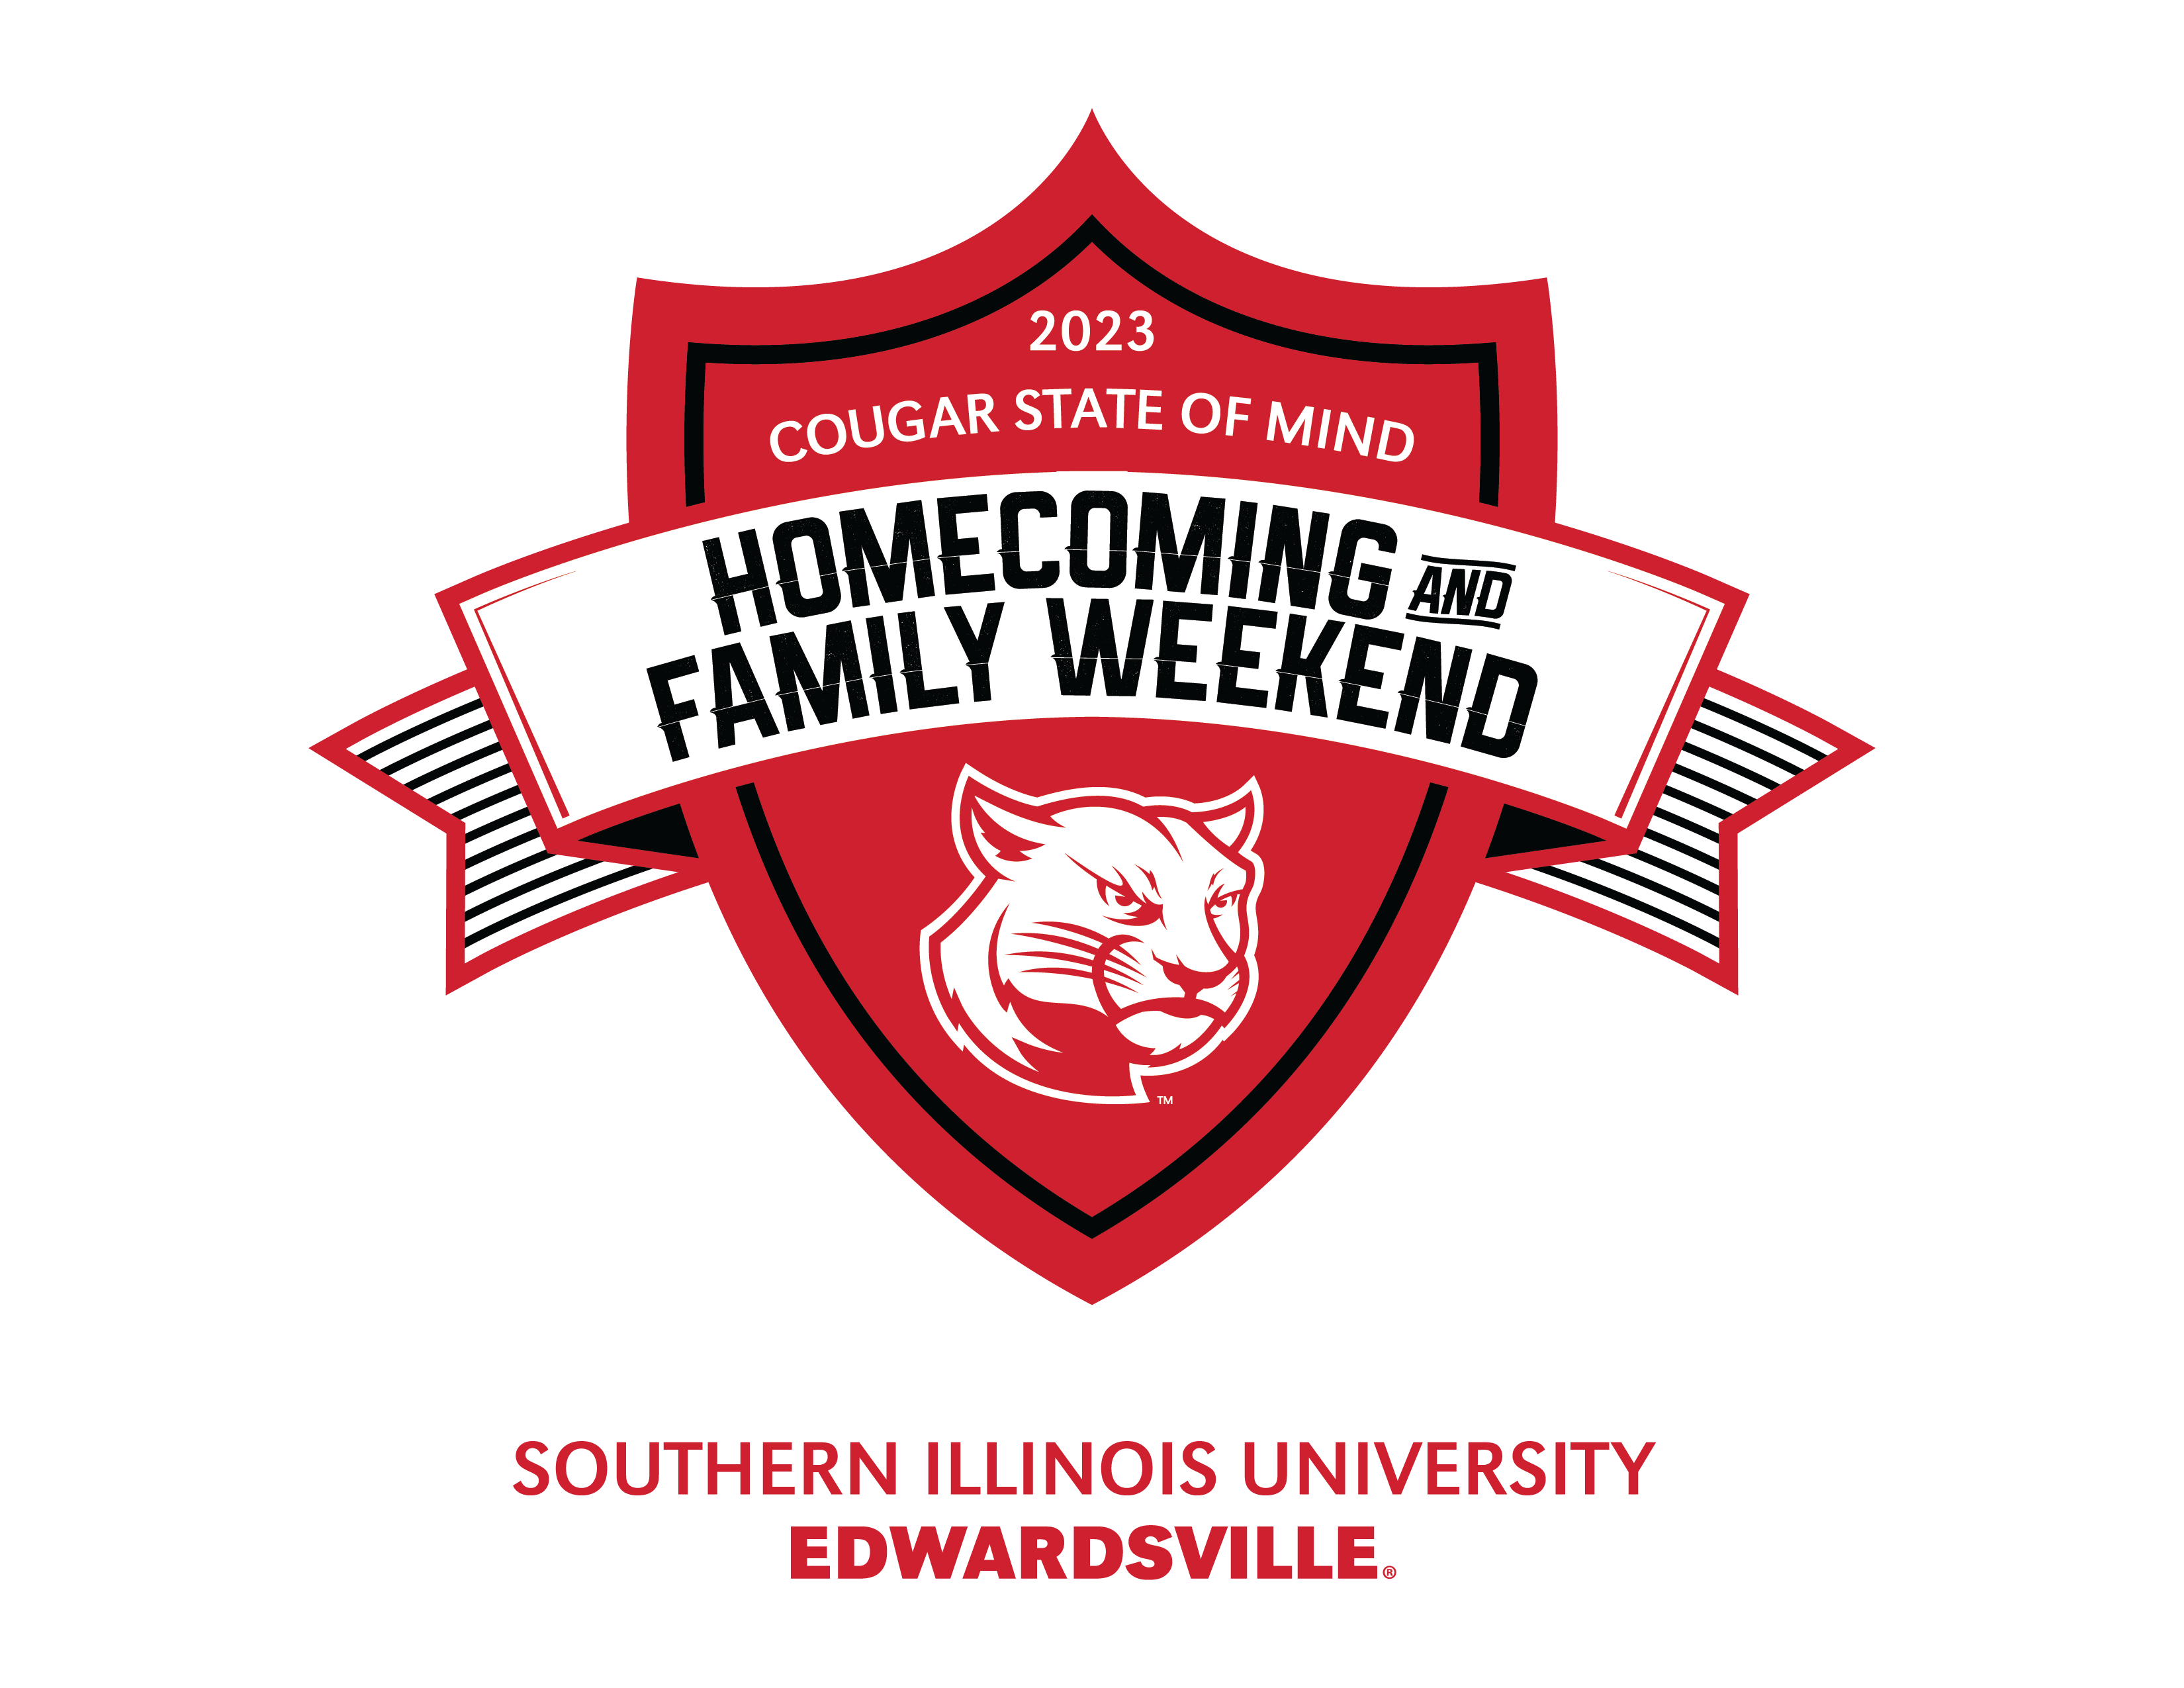 Cougar State of Mind: Homecoming and Family Weekend 2023. Southern llinois University Edwardsville. Cougar Logo.